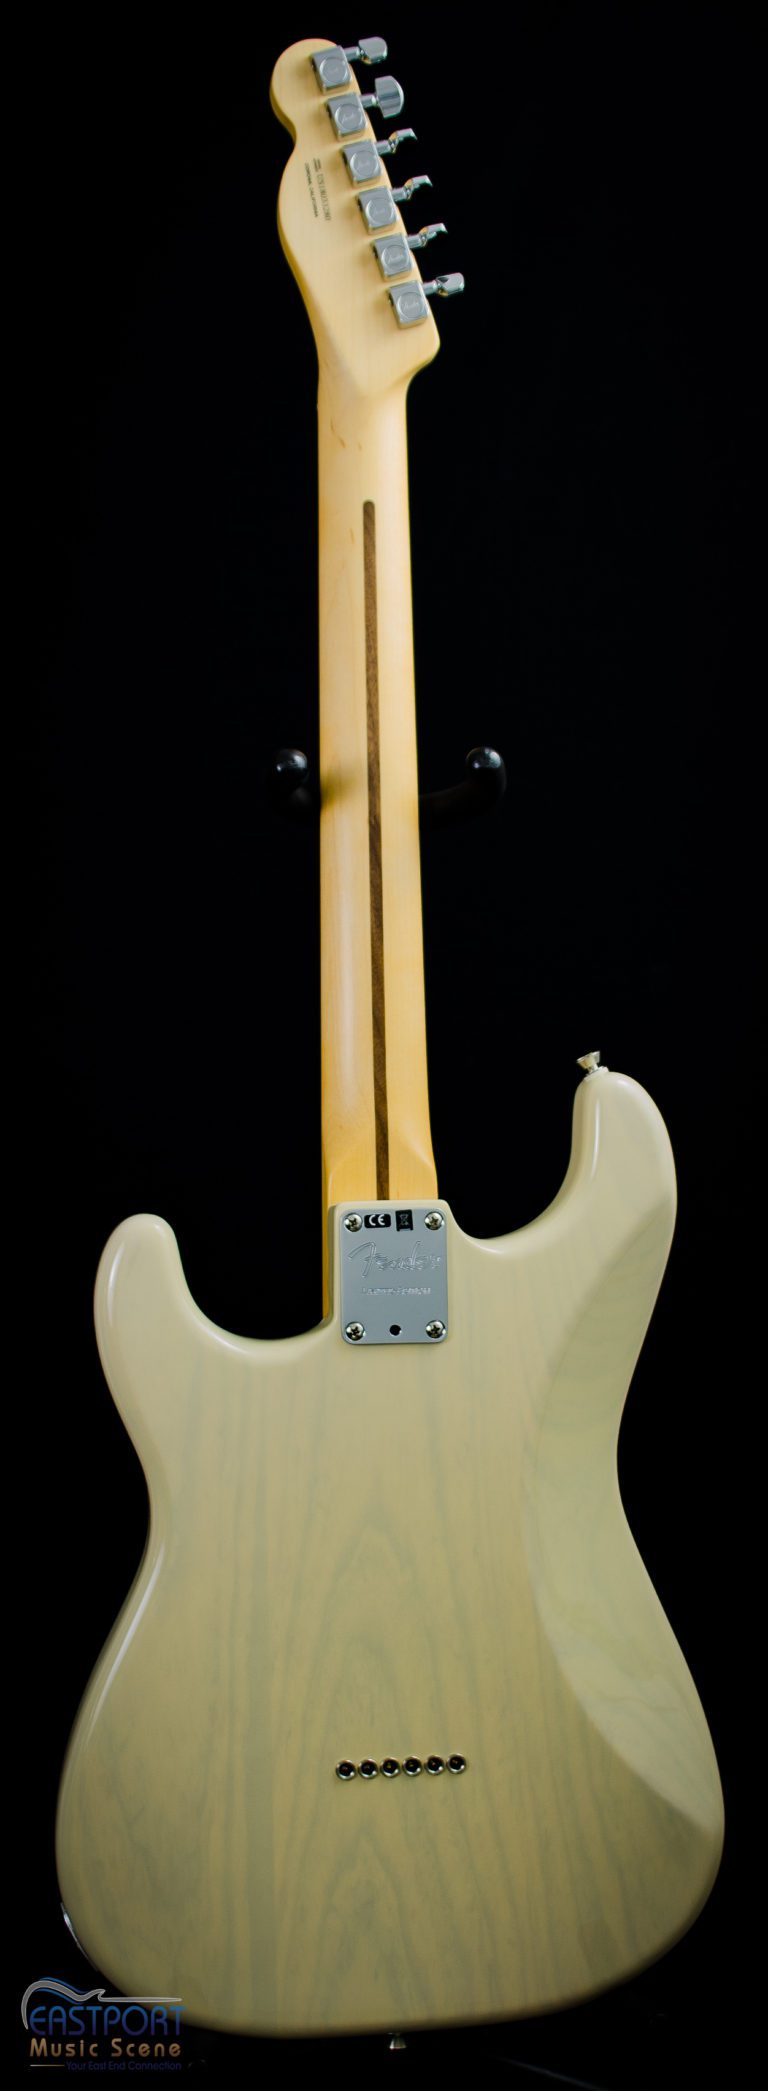 A white electric guitar with two pickups.